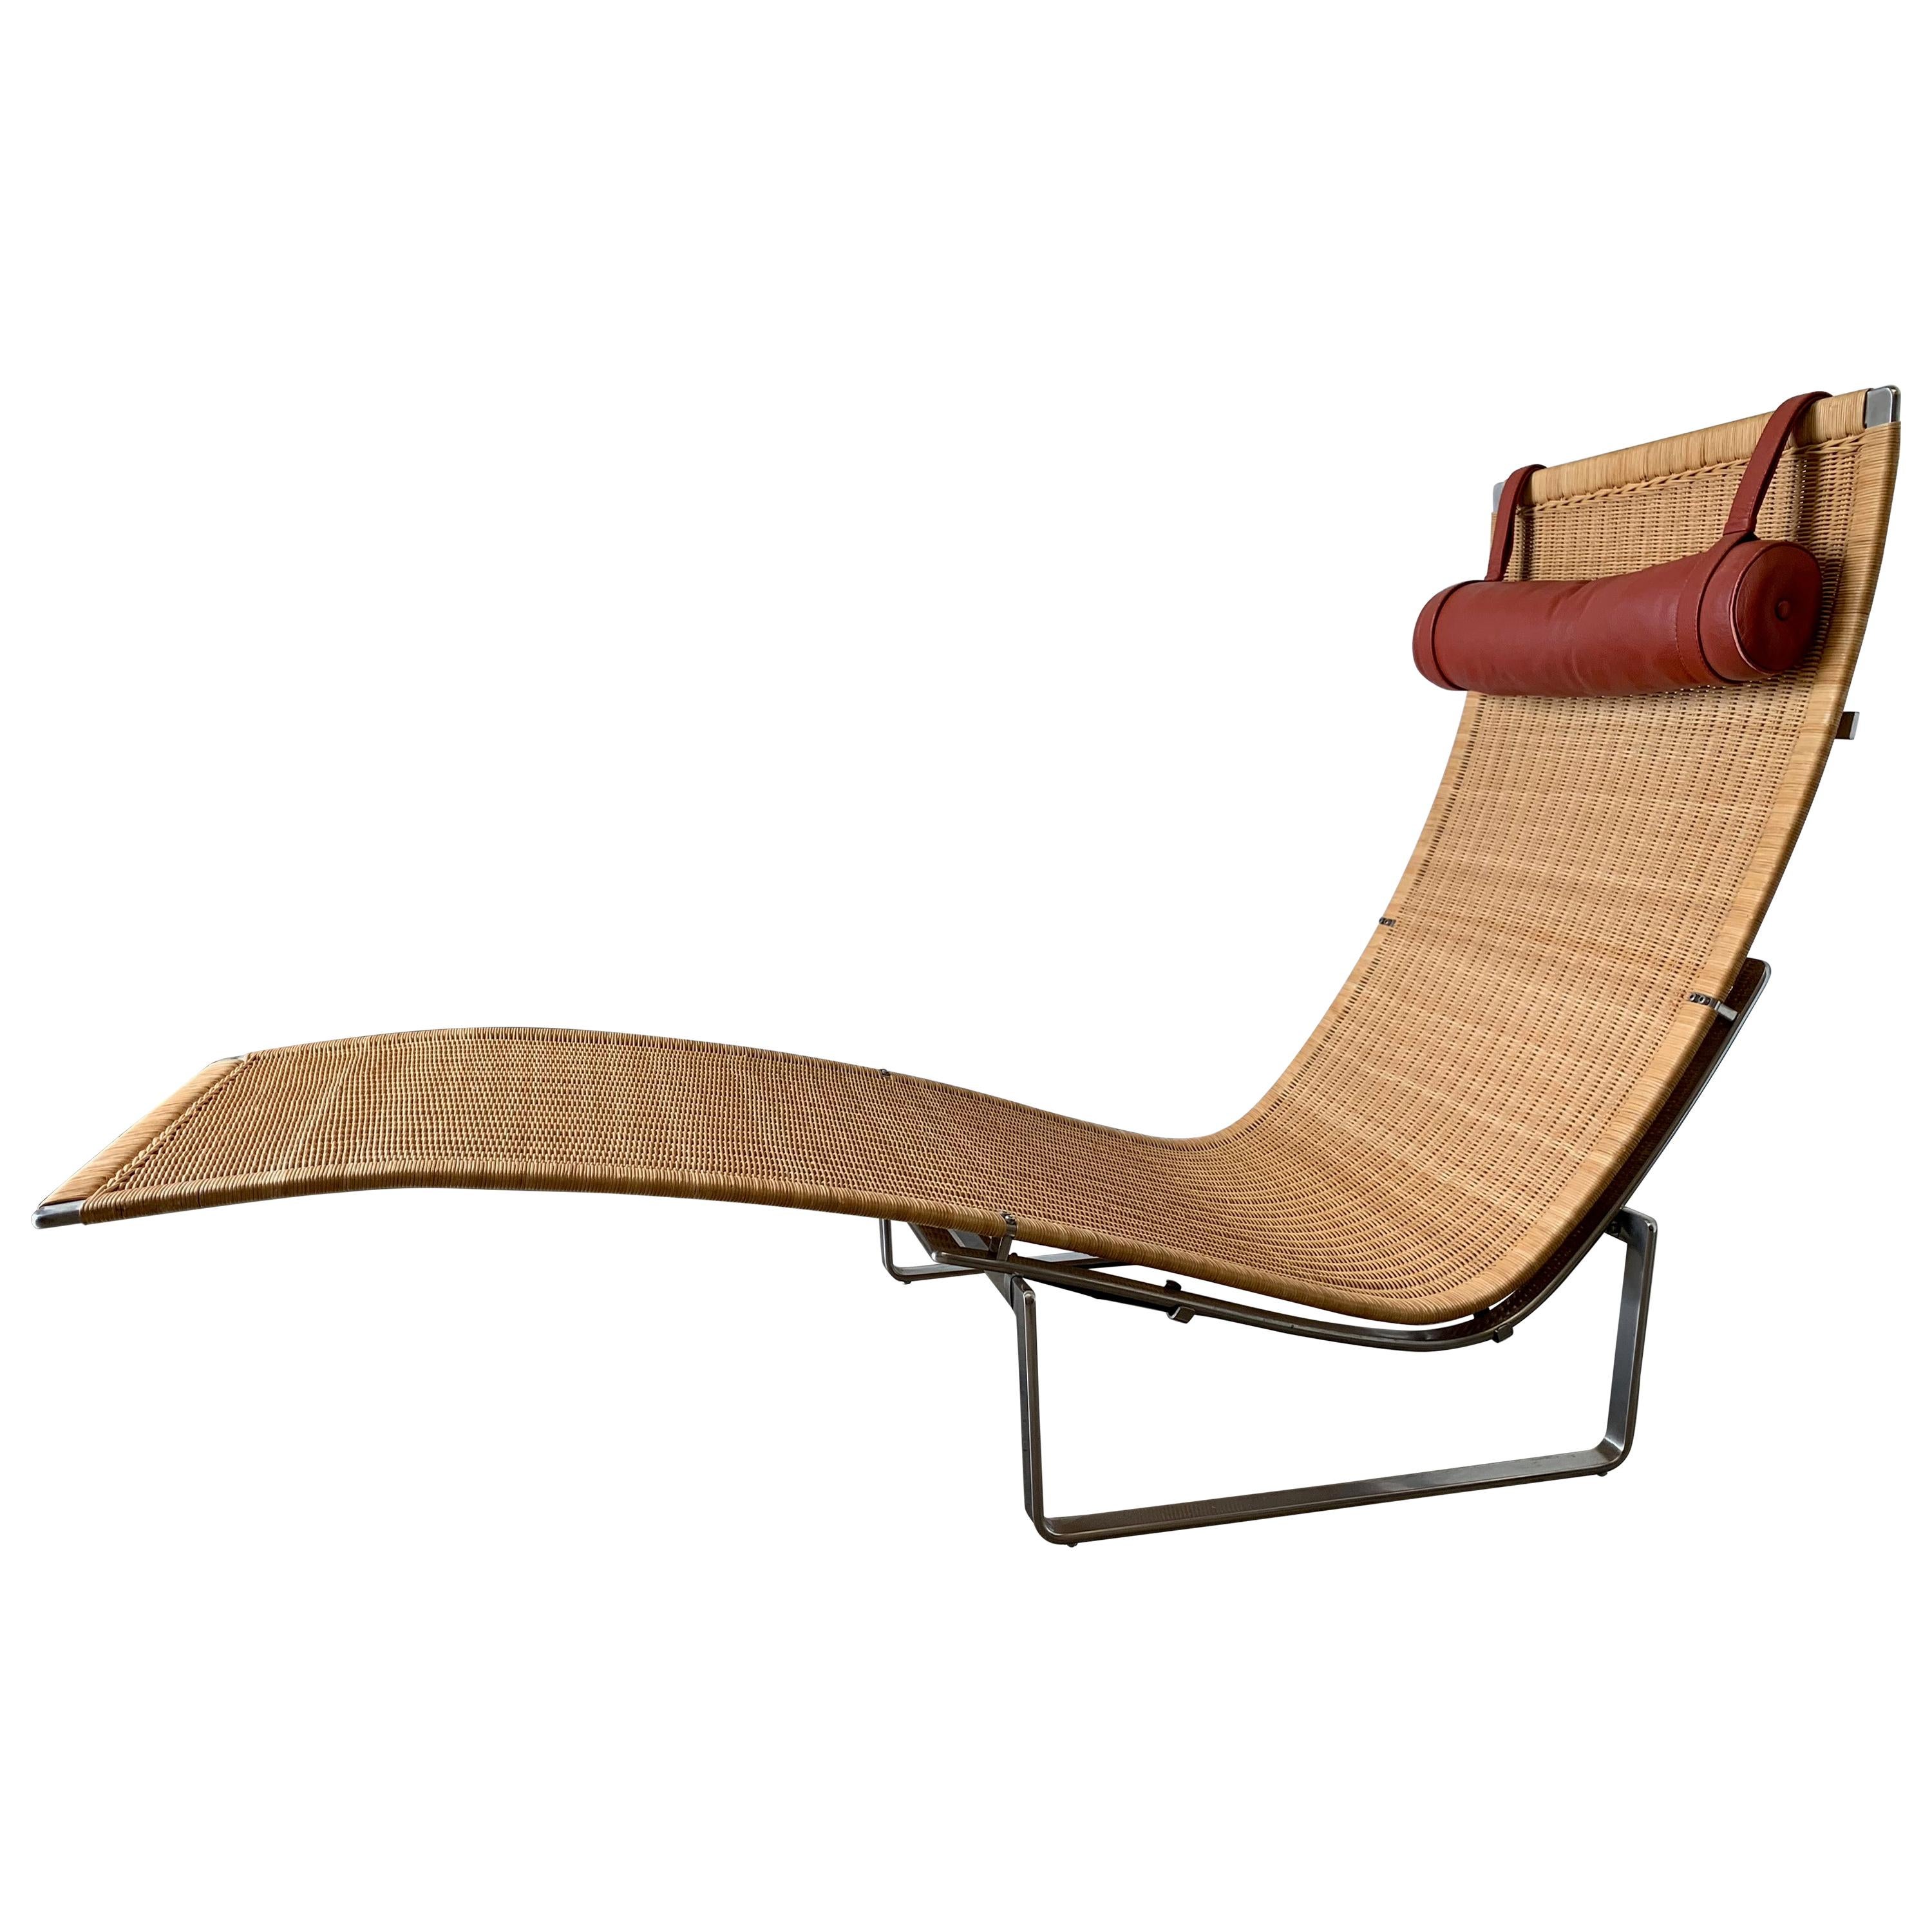 Poul Kjærholm PK 24 Chaise Lounge with Wicker Seat for Fritz Hansen